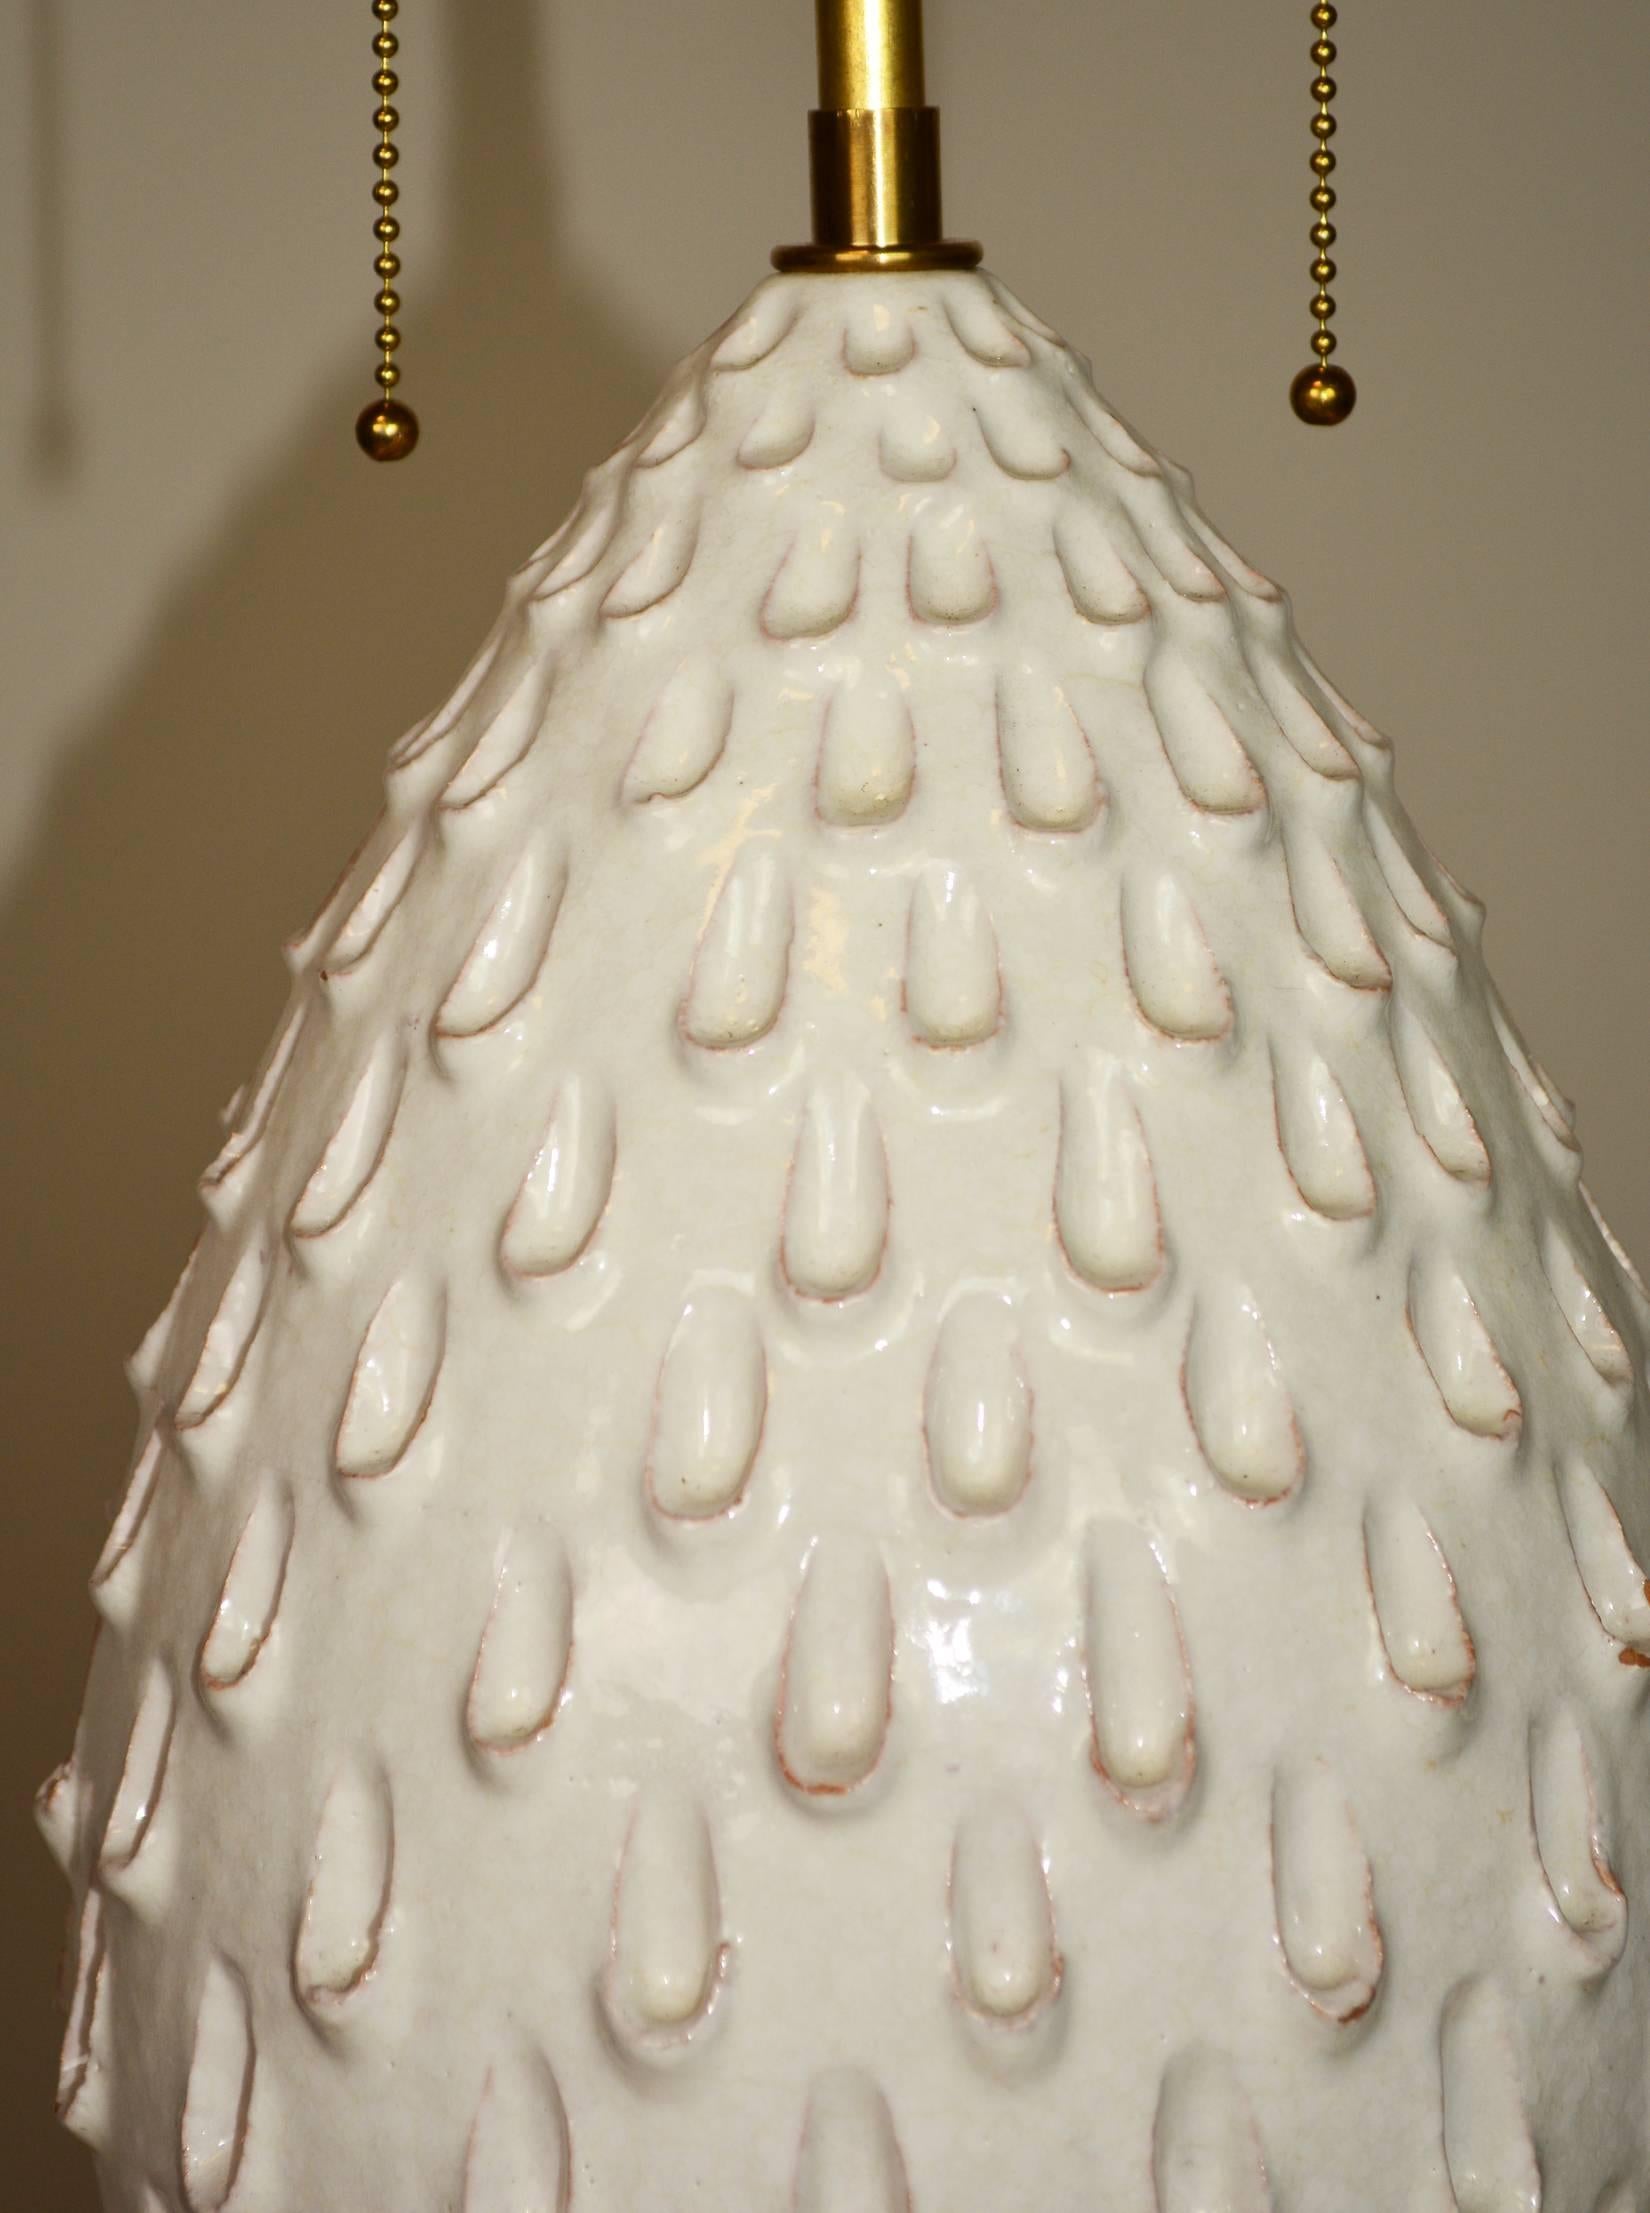 Italian Glazed Terracotta Pineapple Lamp In Good Condition For Sale In Palm Springs, CA